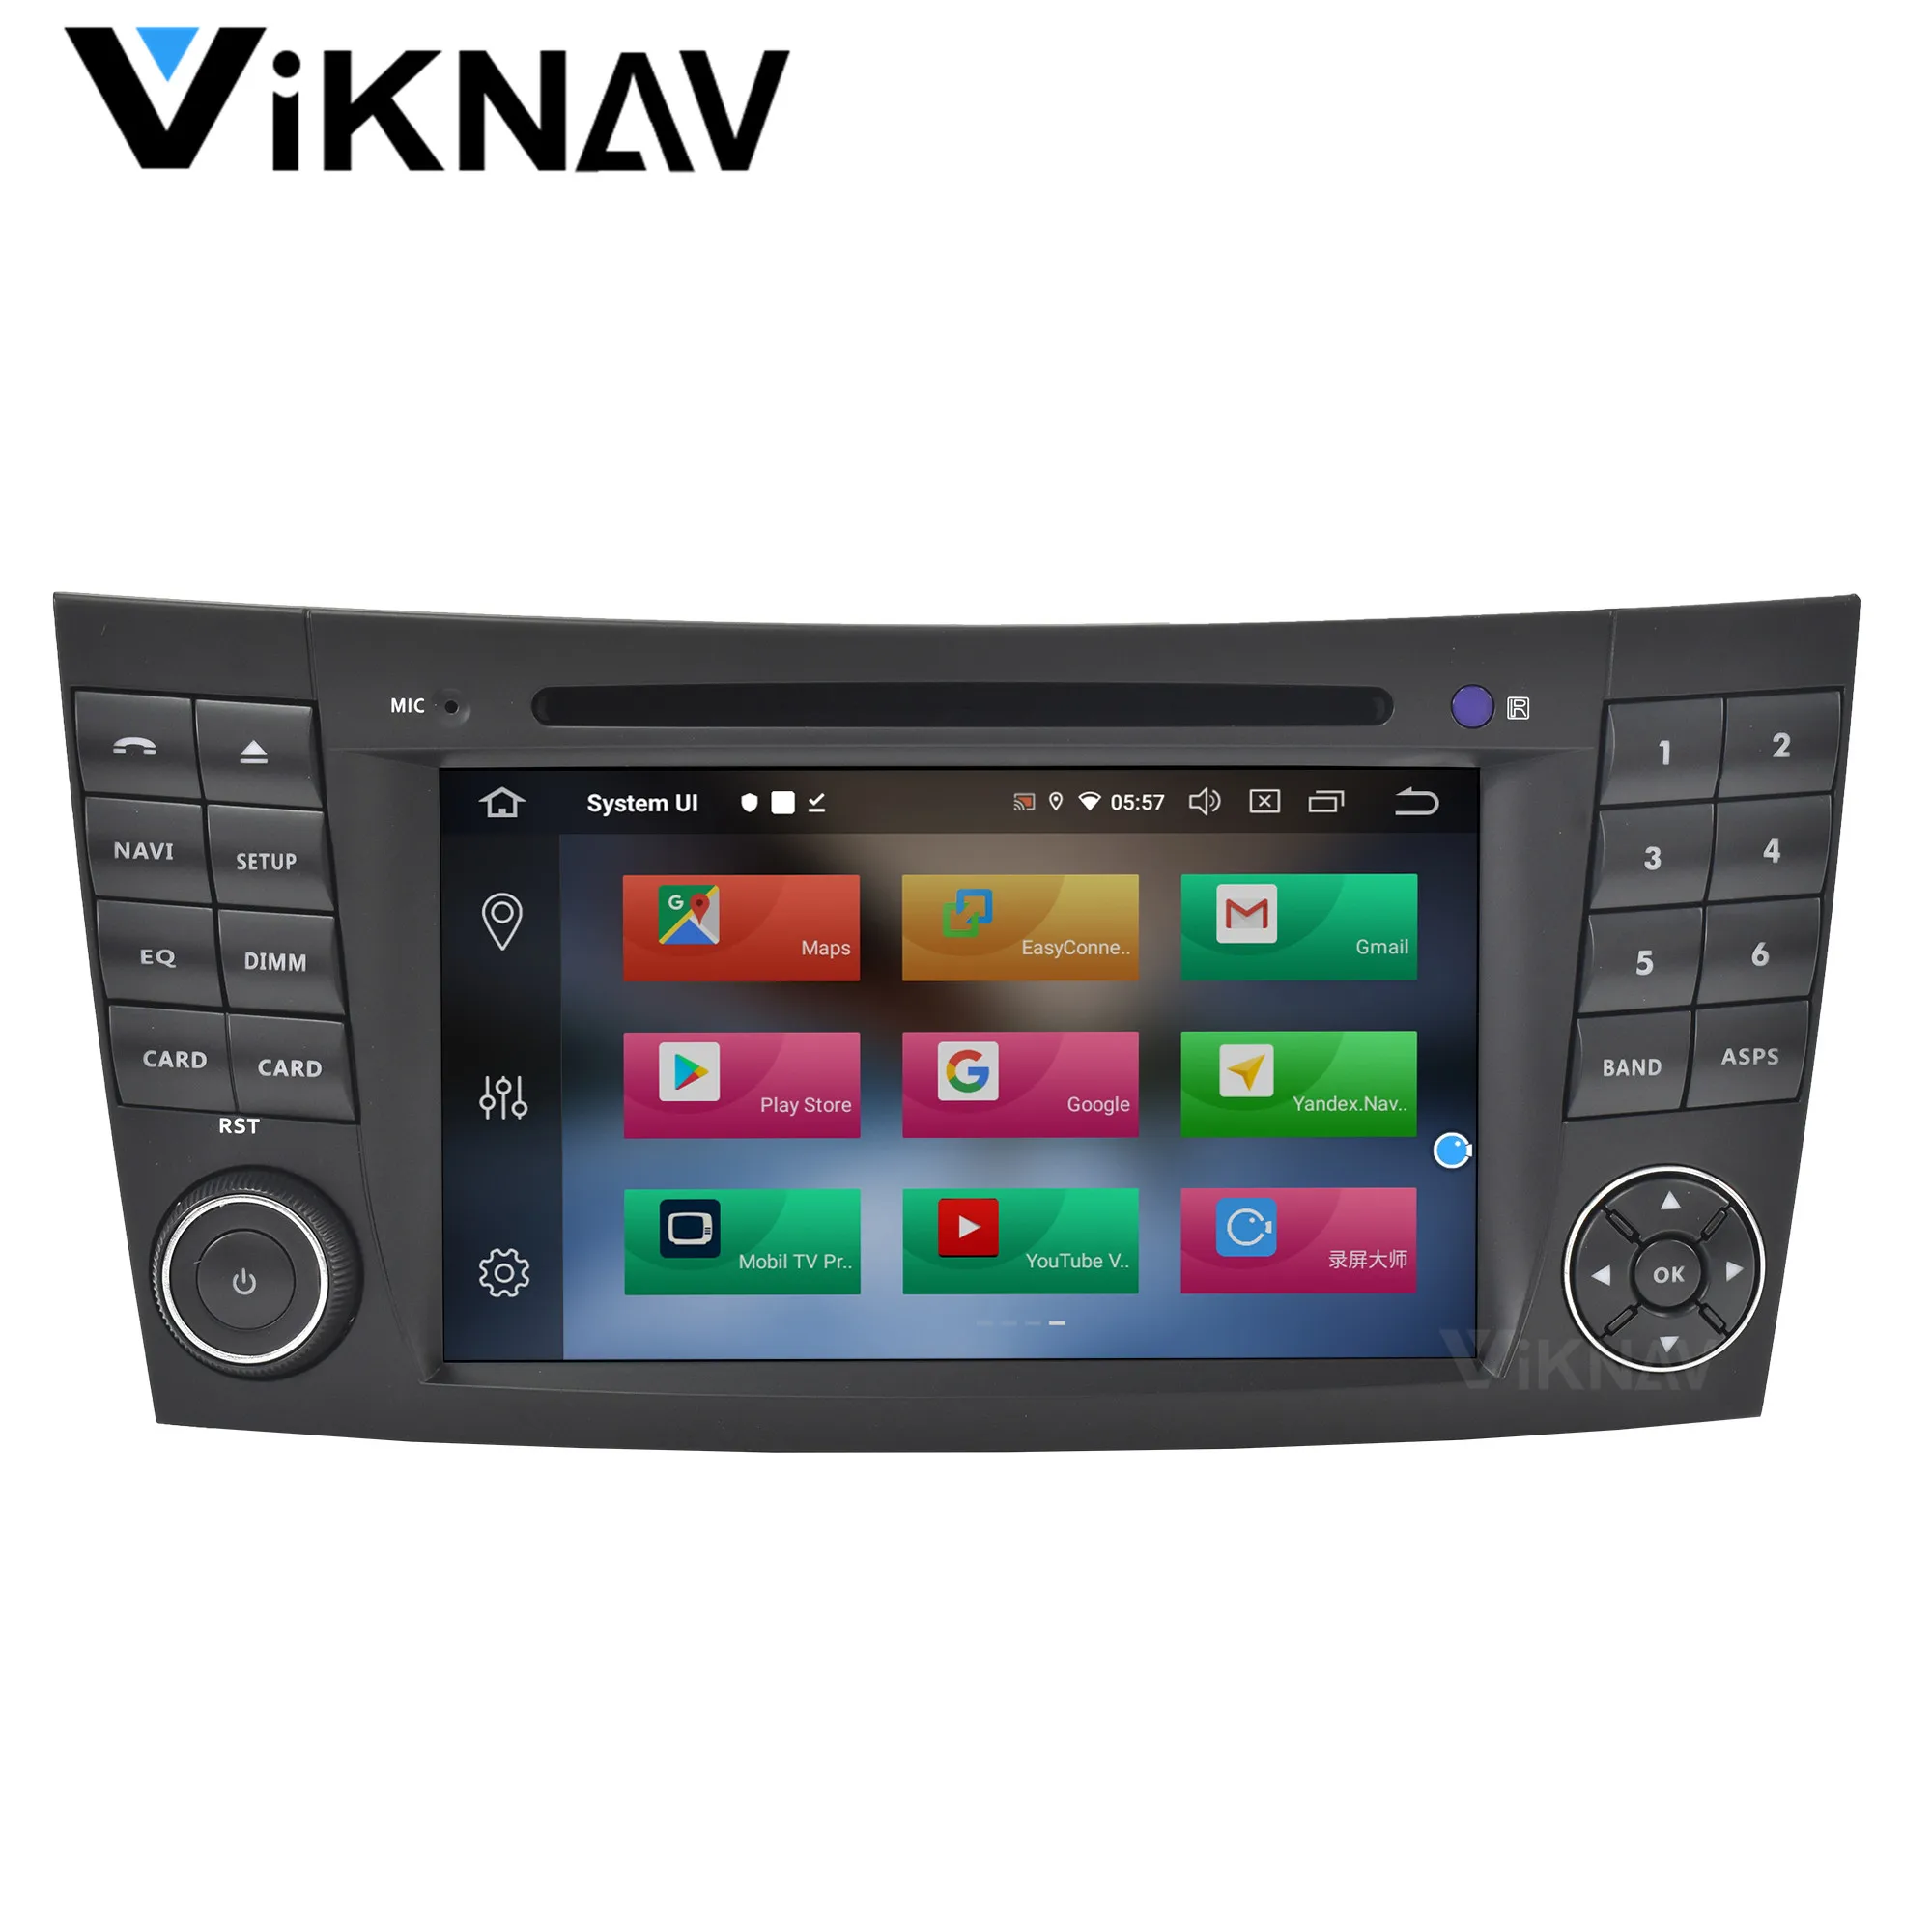 

2 DIN Android 10 Car radio player For Mercedes Benz E-Class W211 CLK G-Class W463 CLS W219 2002-2009 auto stereo gps navigation